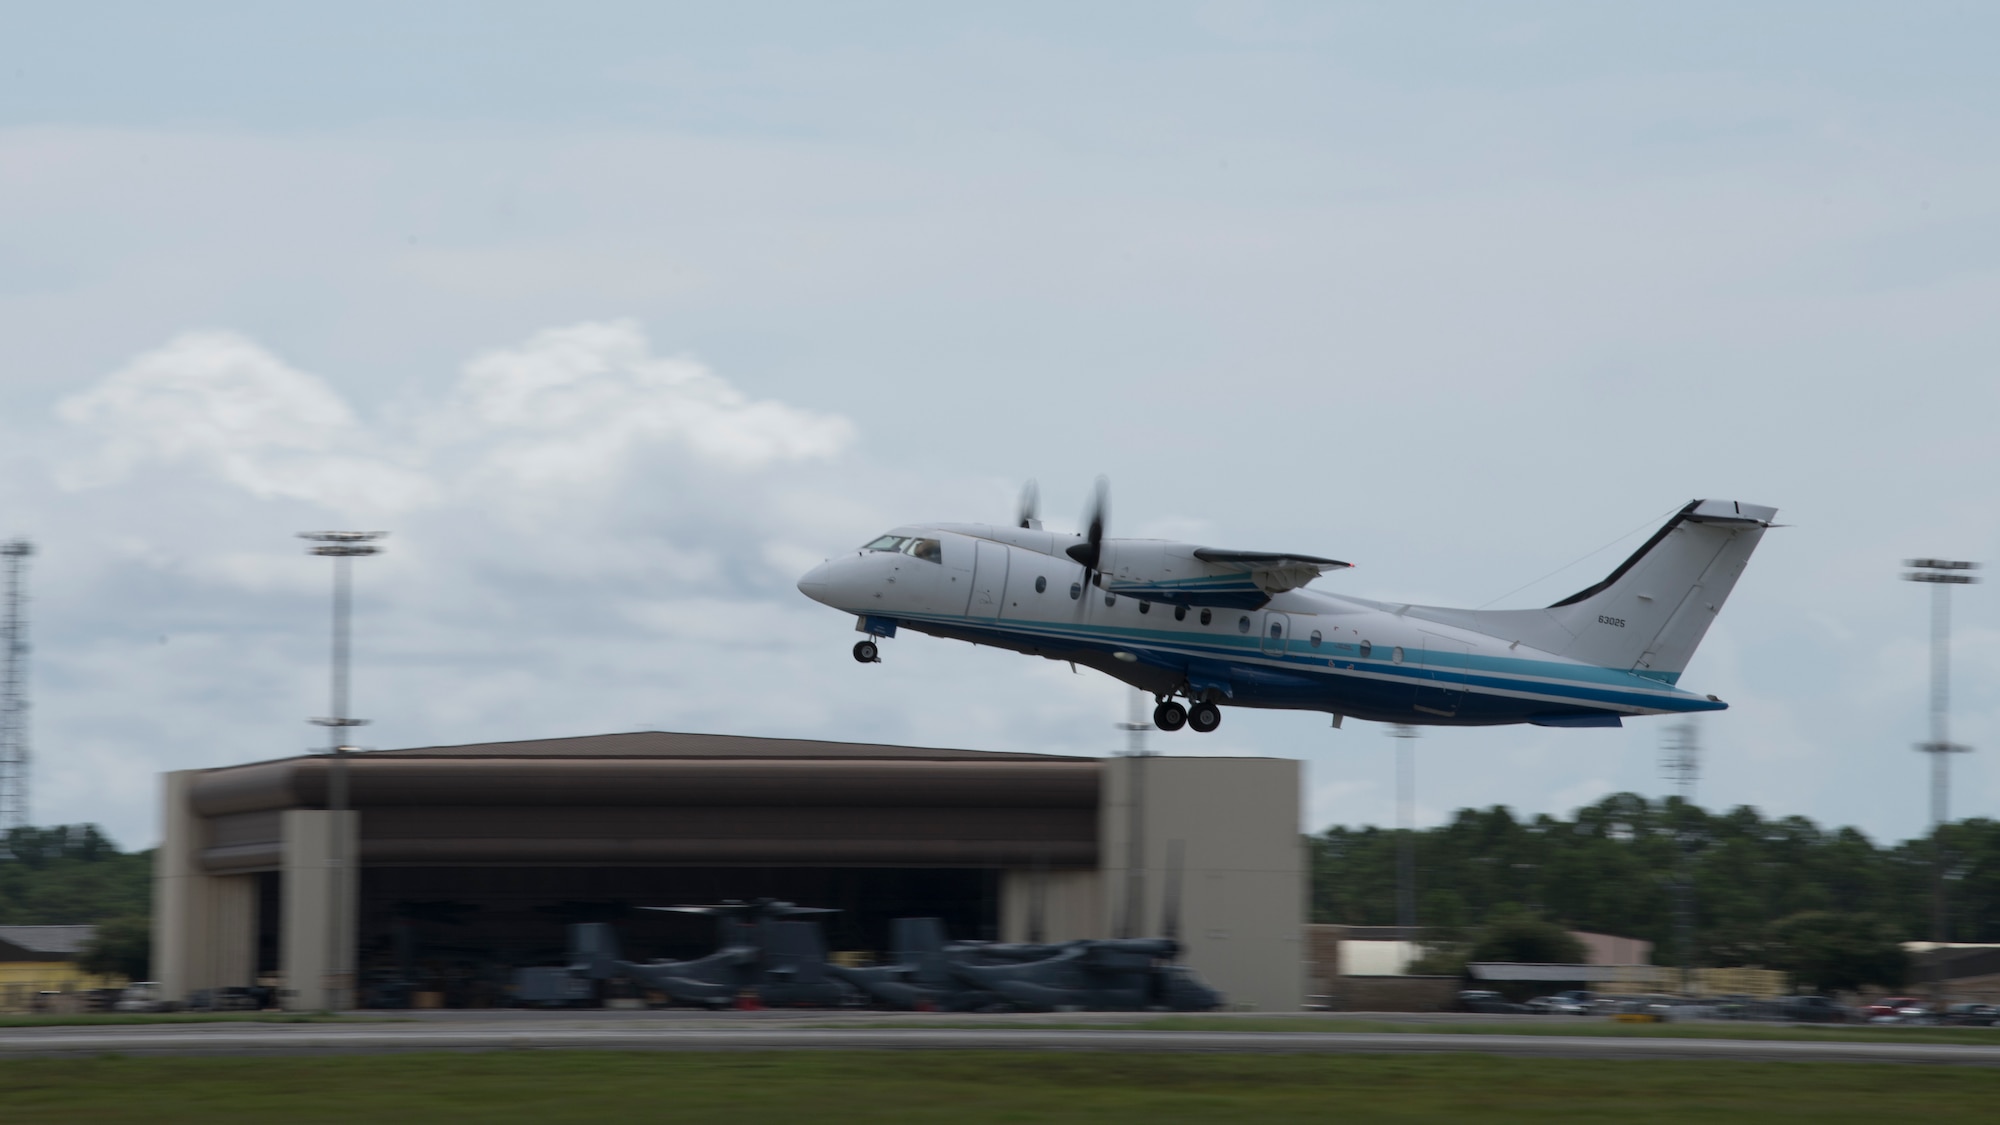 A C-146A Wolfhound assigned to the 524th Special Operations Squadron takes off for a training sortie during the AFSOC Technology, Acquisition, and Sustainment Review at Hurlburt Field, Florida, July 21, 2021. AFSOC TASR is an AFMC and Assistant Secretary of the Air Force for Acquisition, Technology & Logistics review of current and future AFSOC capabilities supporting prospective acquisitions and shaping the future force. (U.S. Air Force photo by Tech. Sgt. Victor J. Caputo)